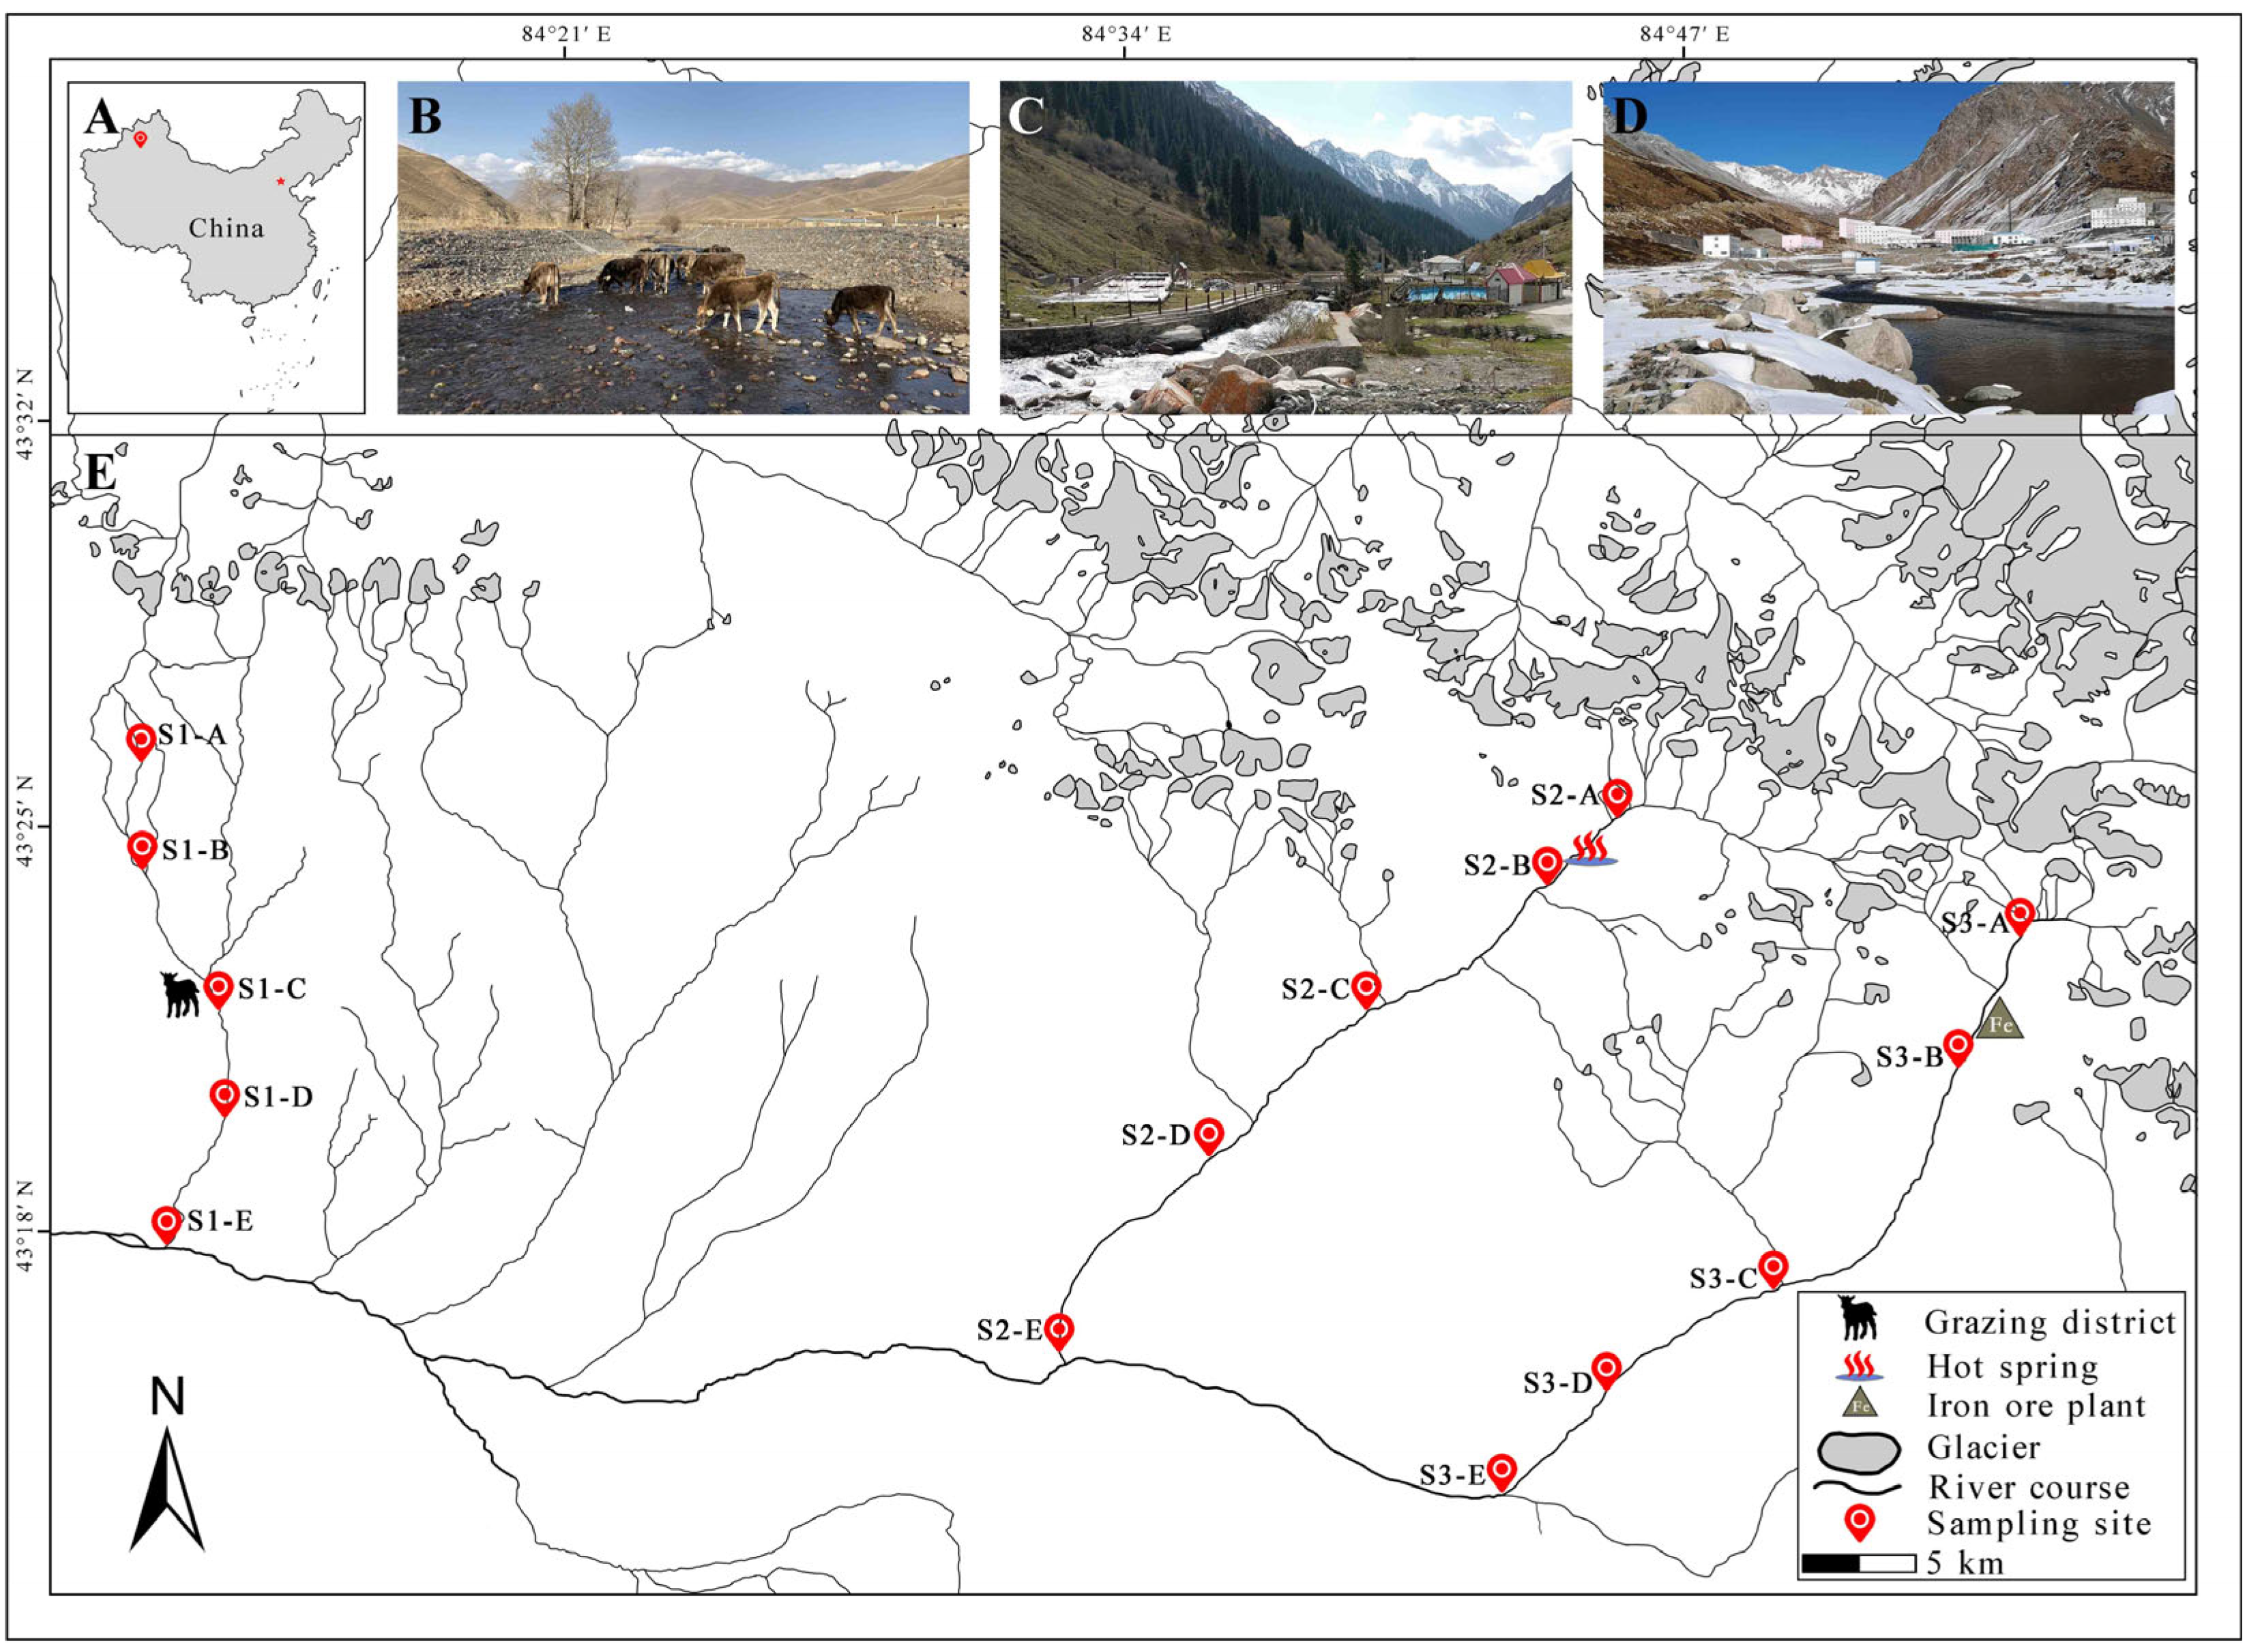 Measurement and significance of electrical conductivity in small mountain  streams